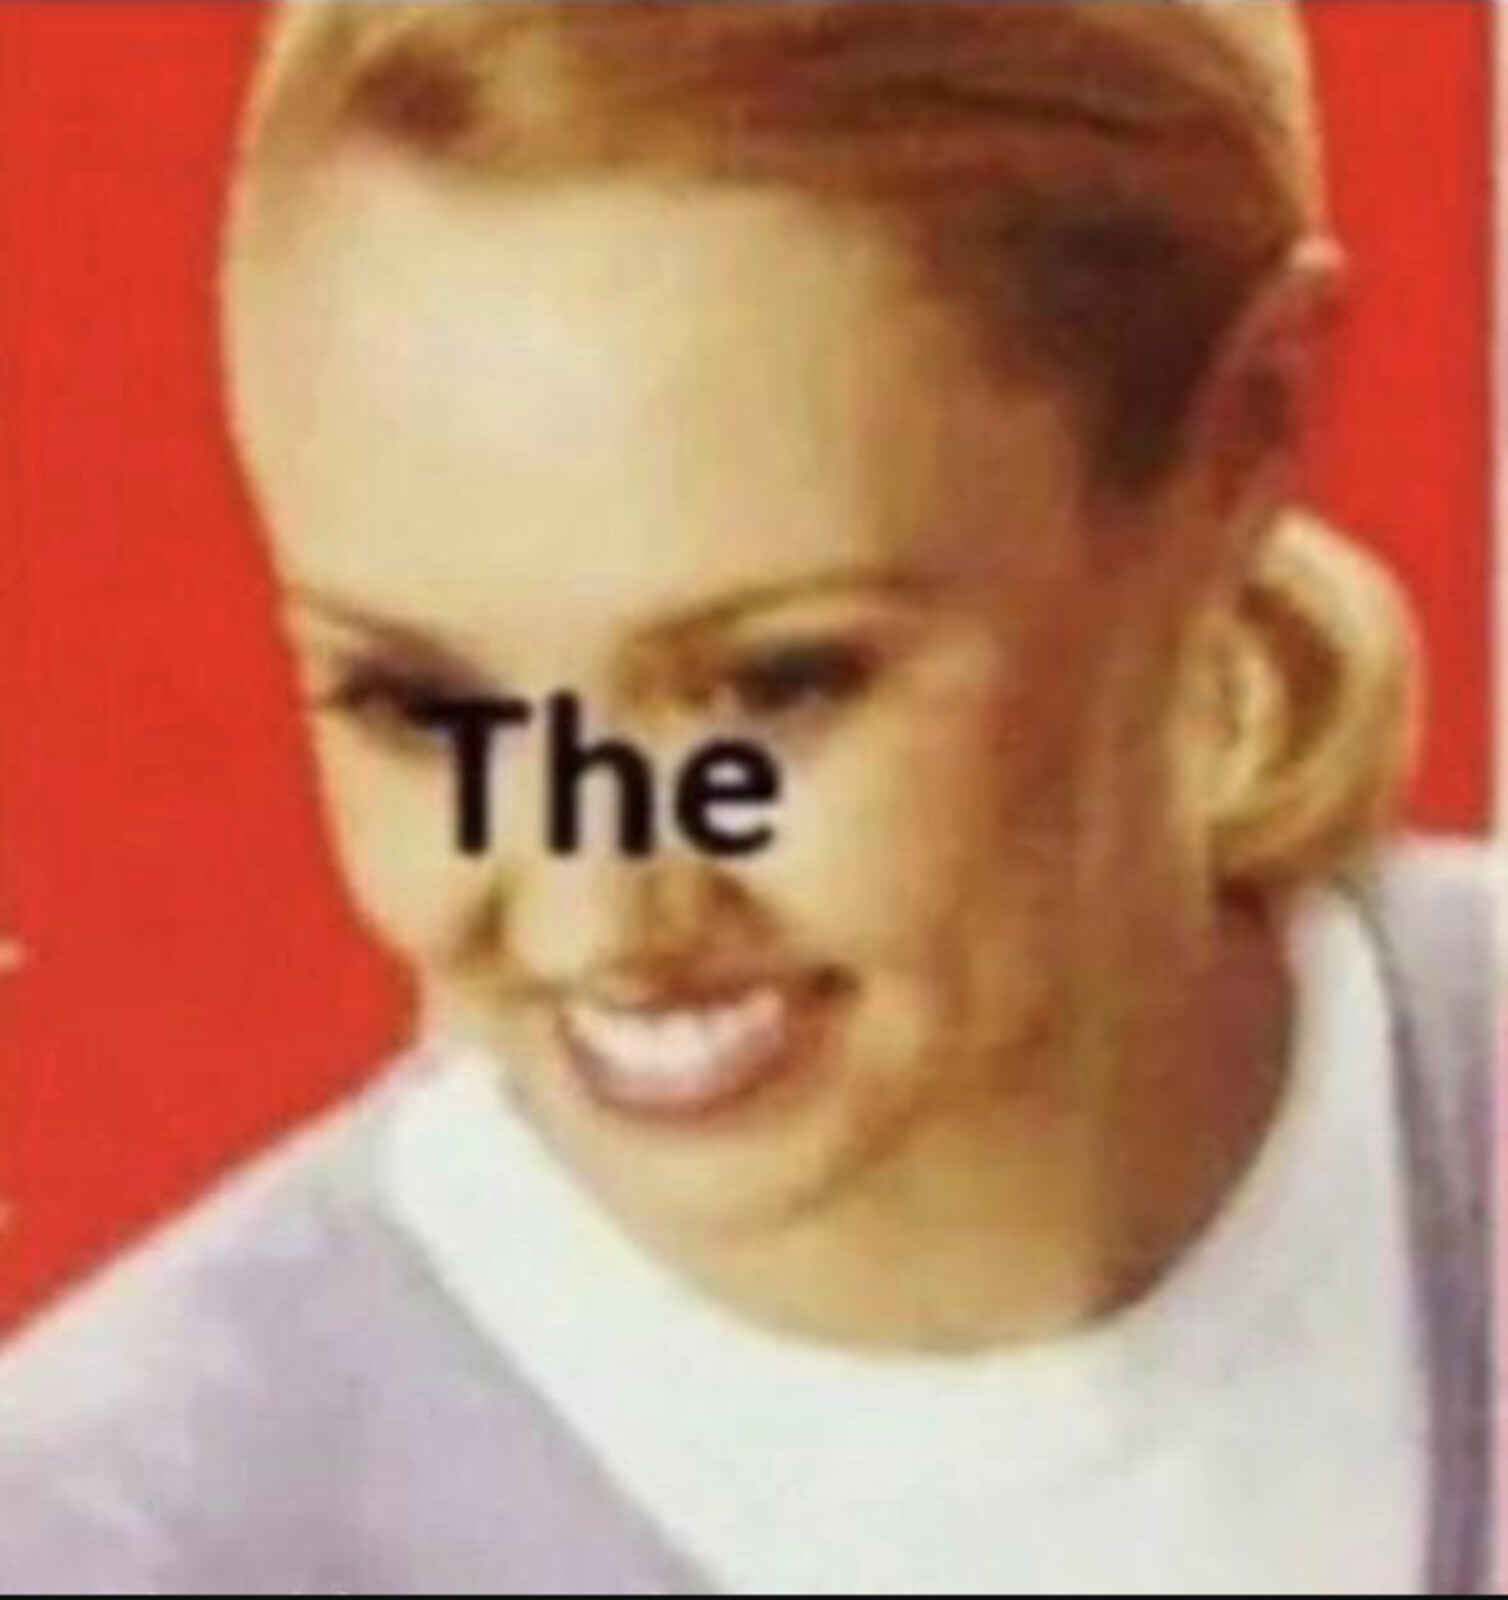 a lady with a surprised look on her face with the caption “the”